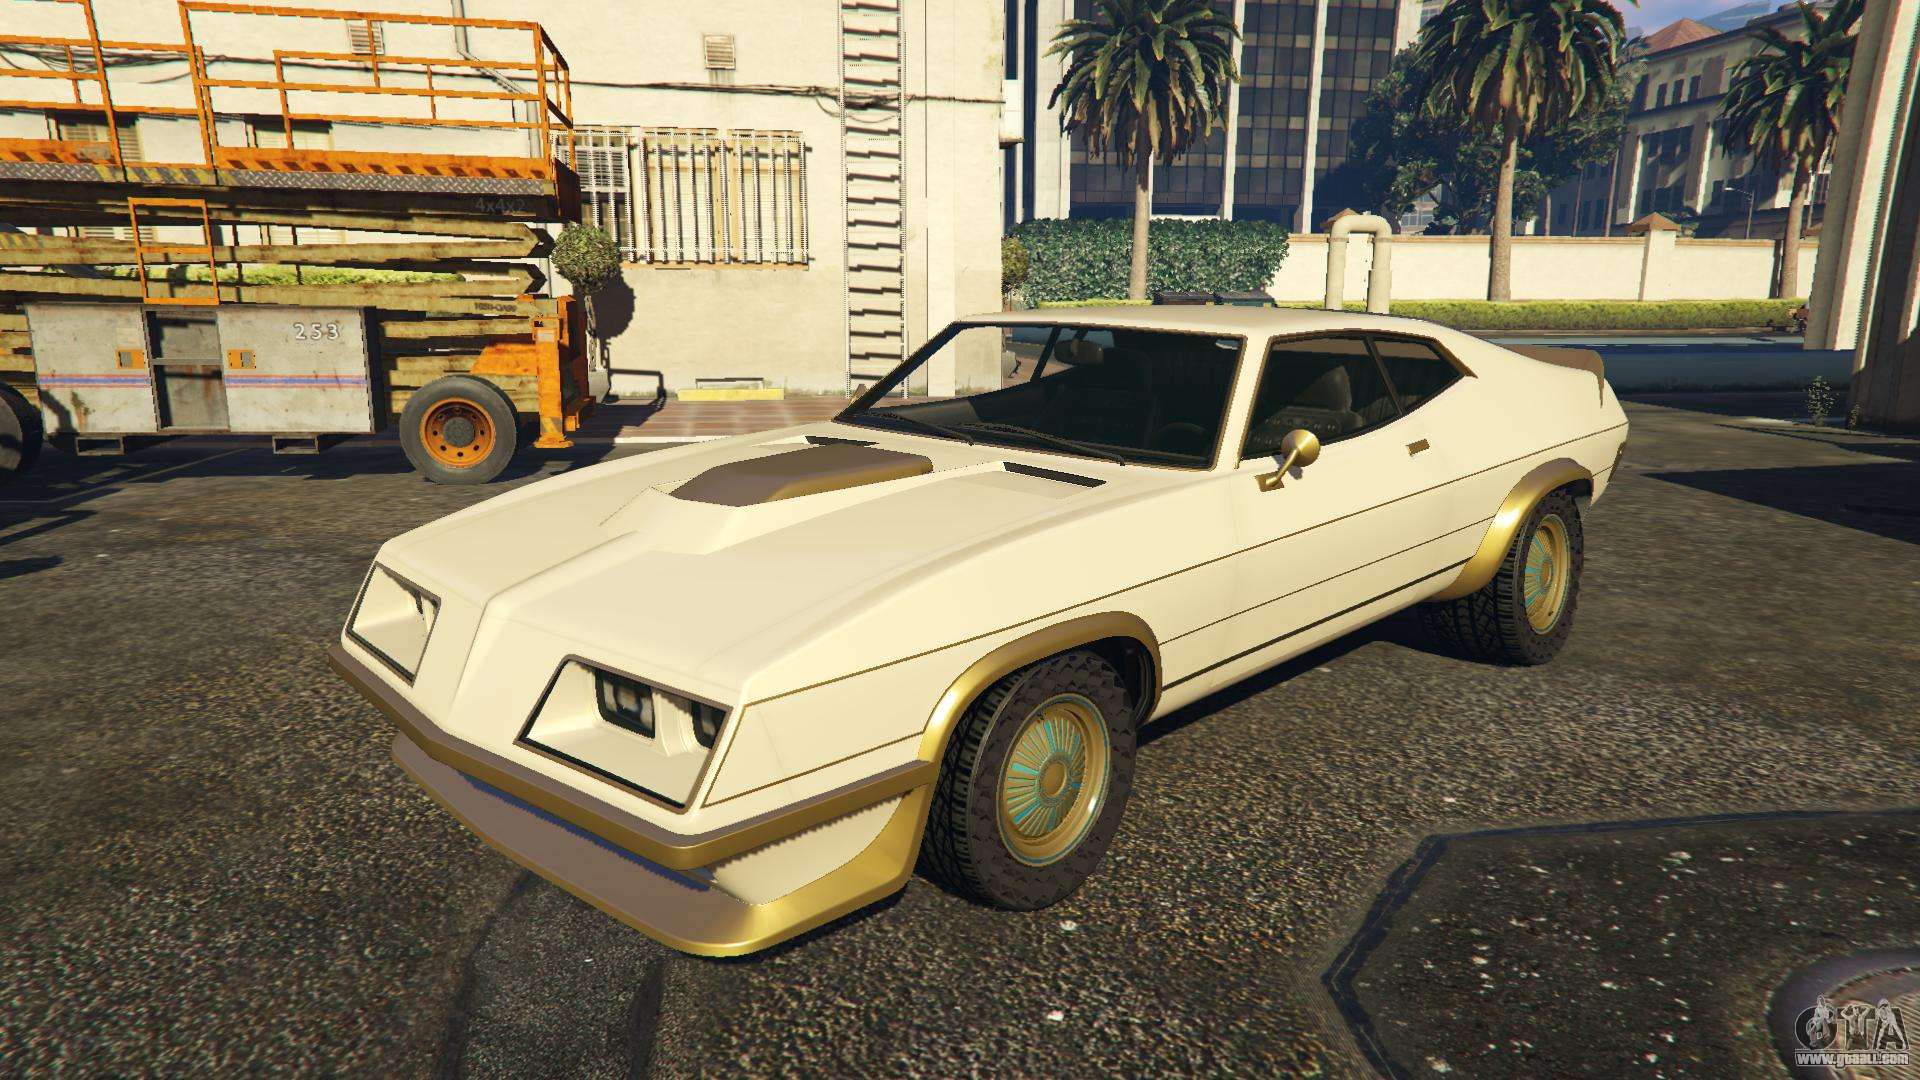 Vapid Future Shock Imperator Gta 5 Online Where To Find And To Buy And Sell In Real Life Description